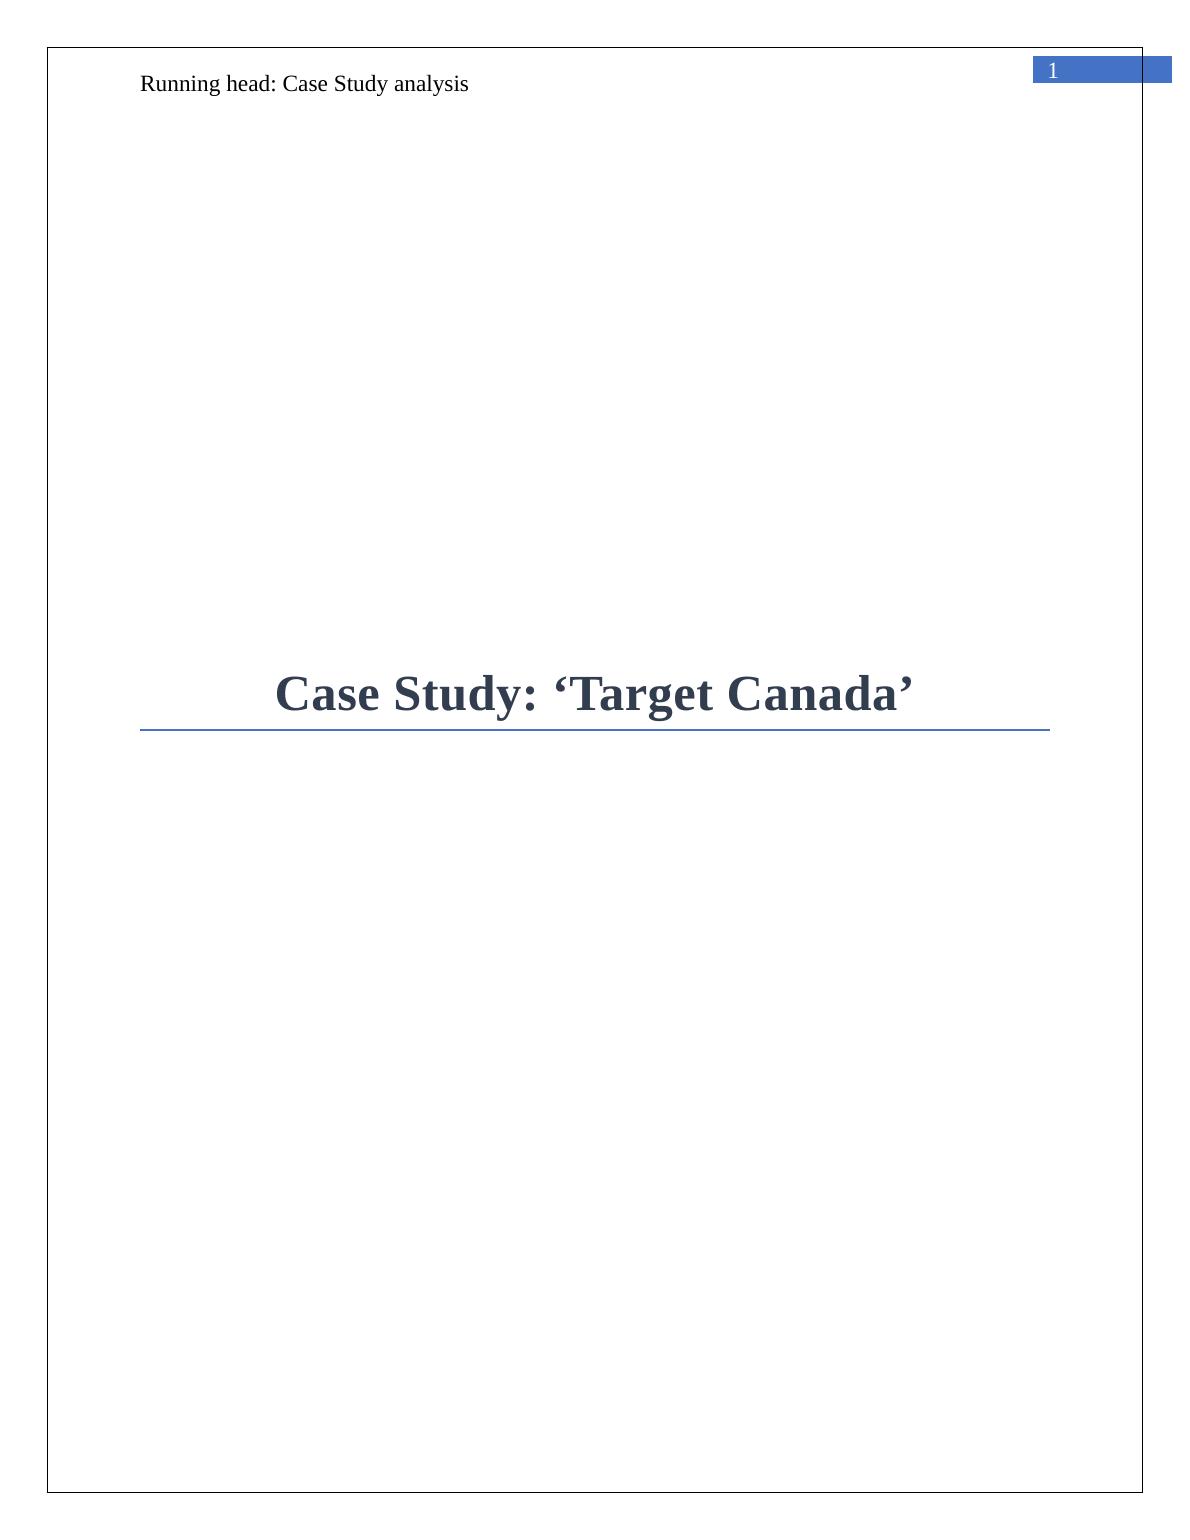 Key Issues Faced by Target Canada_1